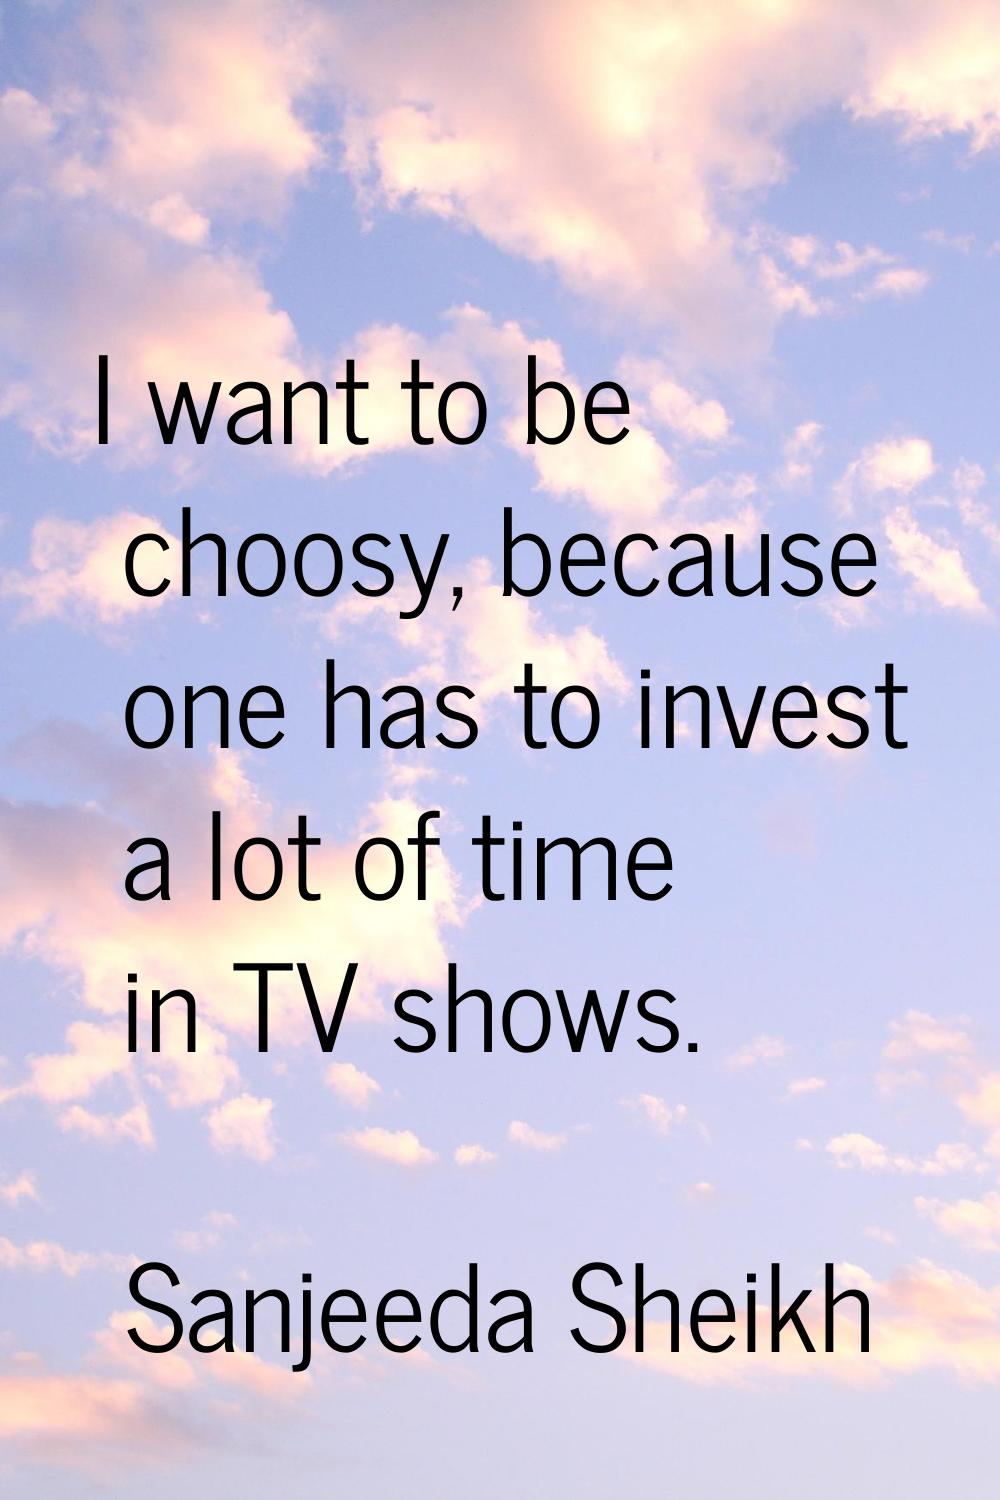 I want to be choosy, because one has to invest a lot of time in TV shows.